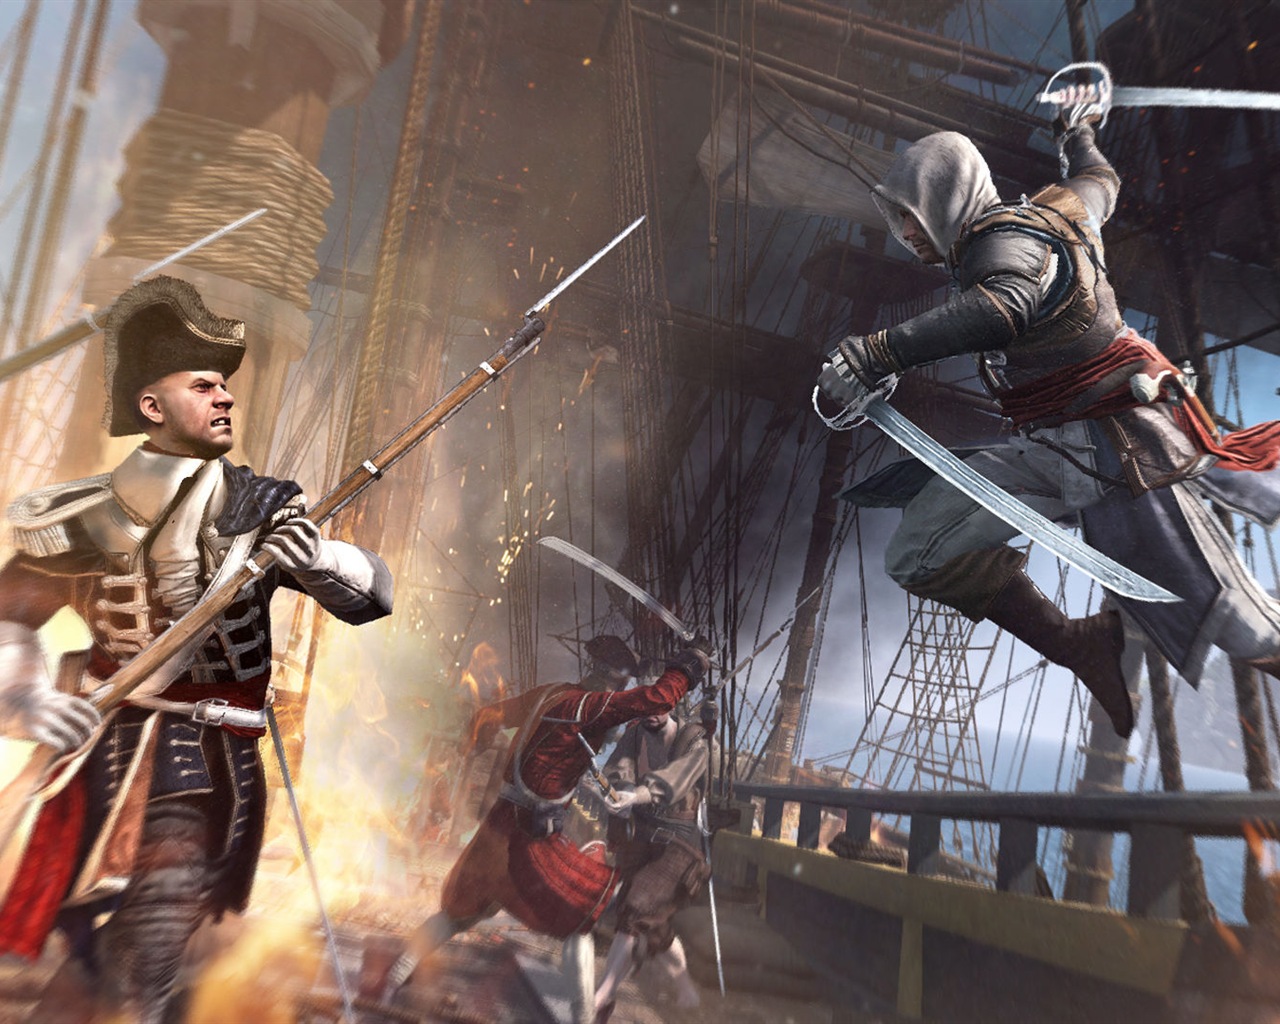 Creed IV Assassin: Black Flag HD wallpapers #12 - 1280x1024